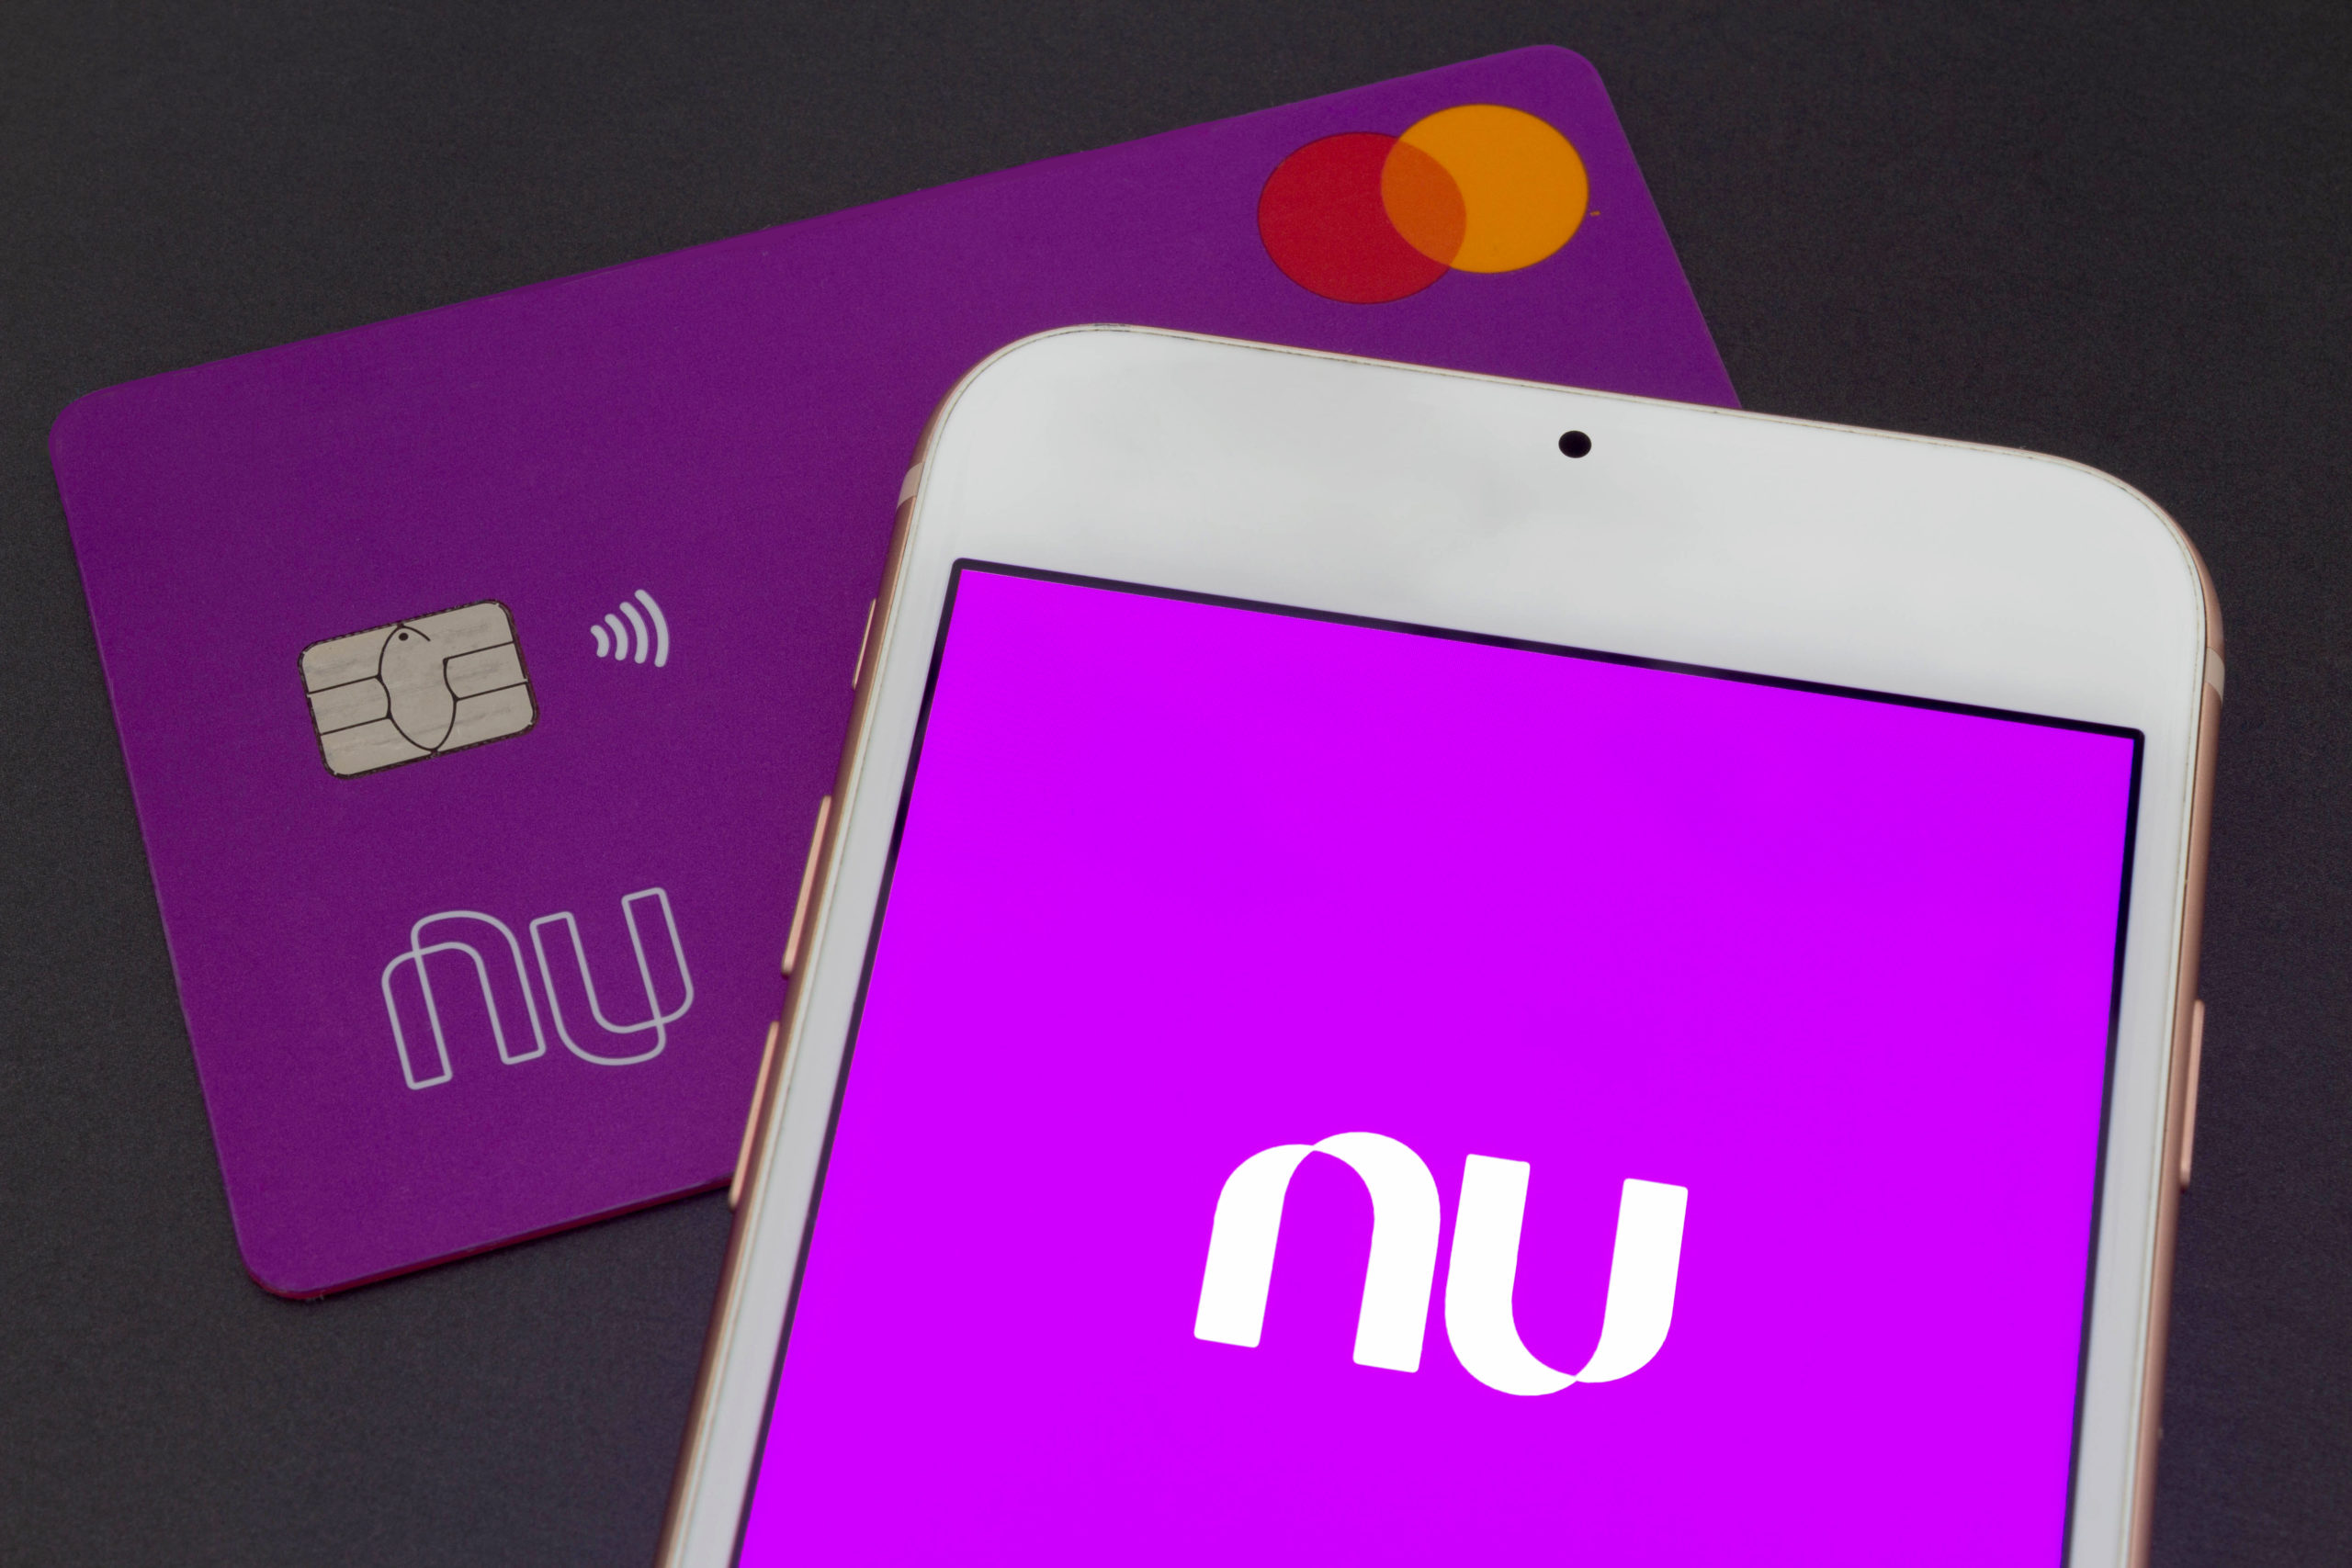 Nubank is posting a general alert to customers who use credit cards